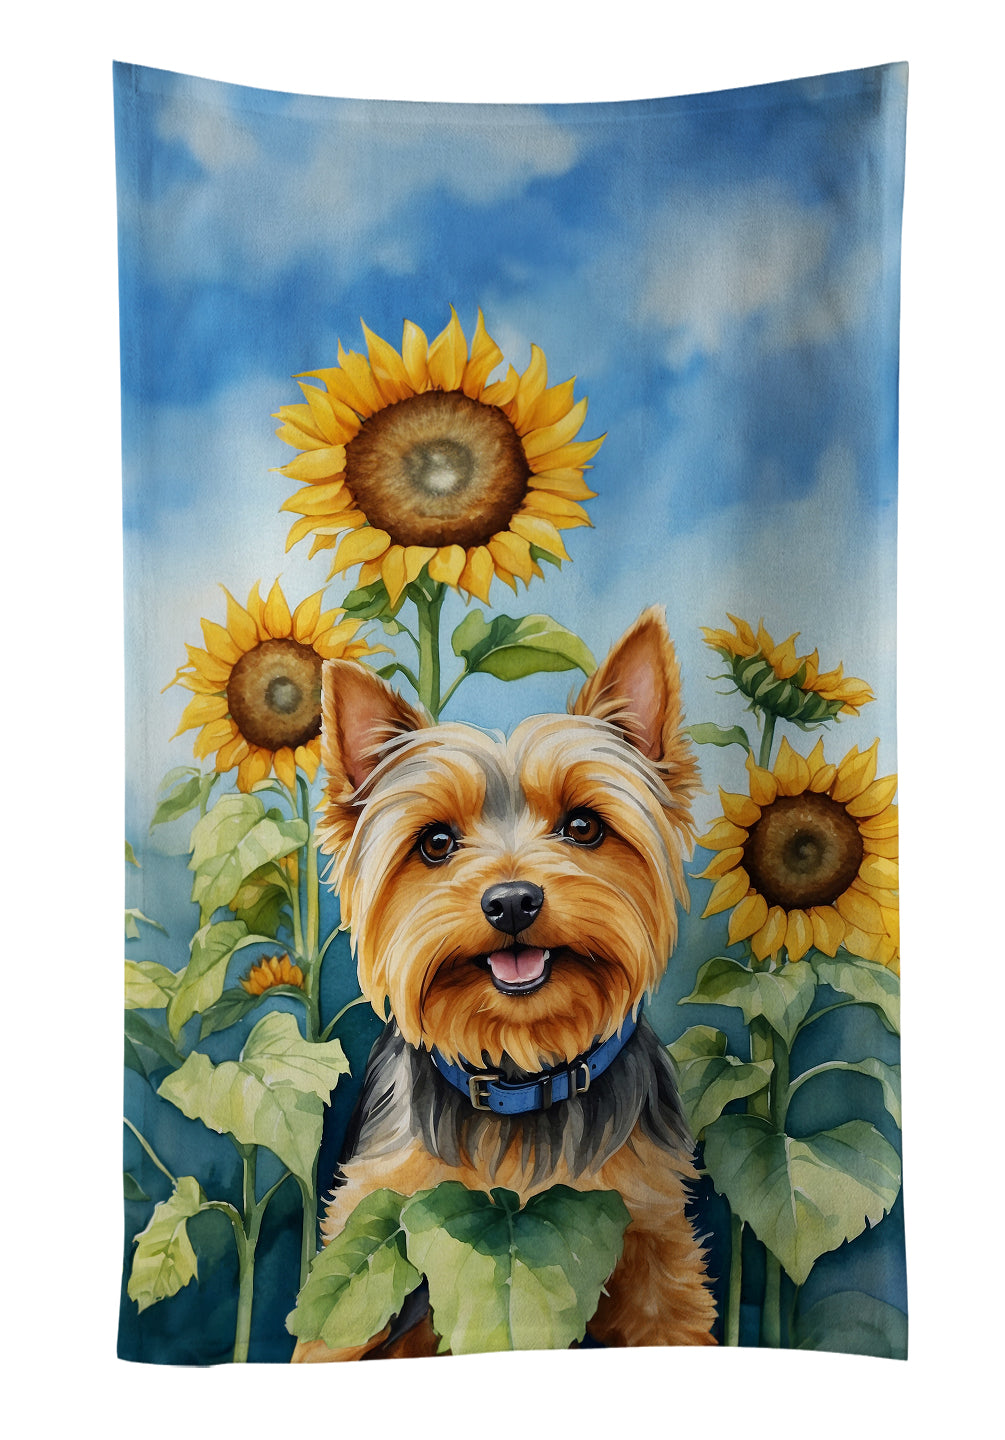 Buy this Silky Terrier in Sunflowers Kitchen Towel